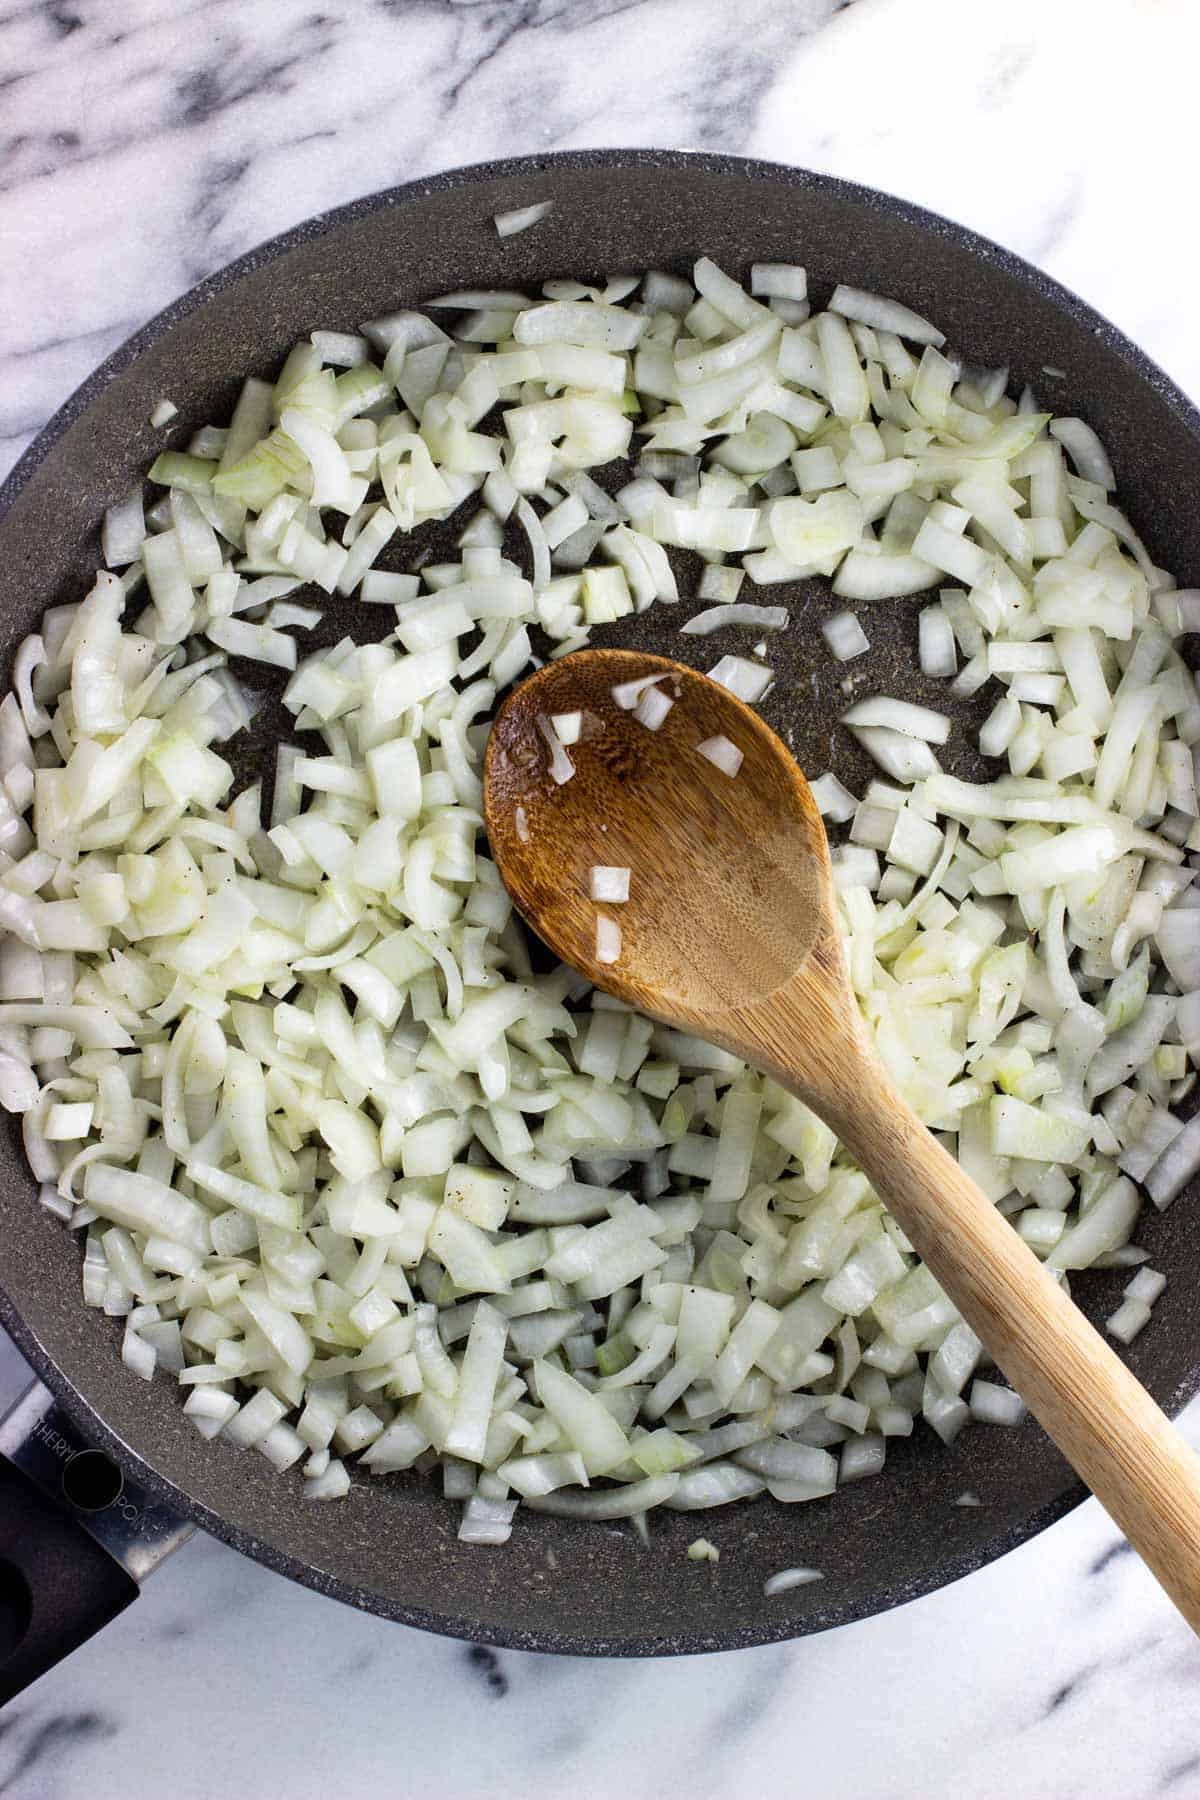 Diced onion pieces in a pan with a wooden spoon.